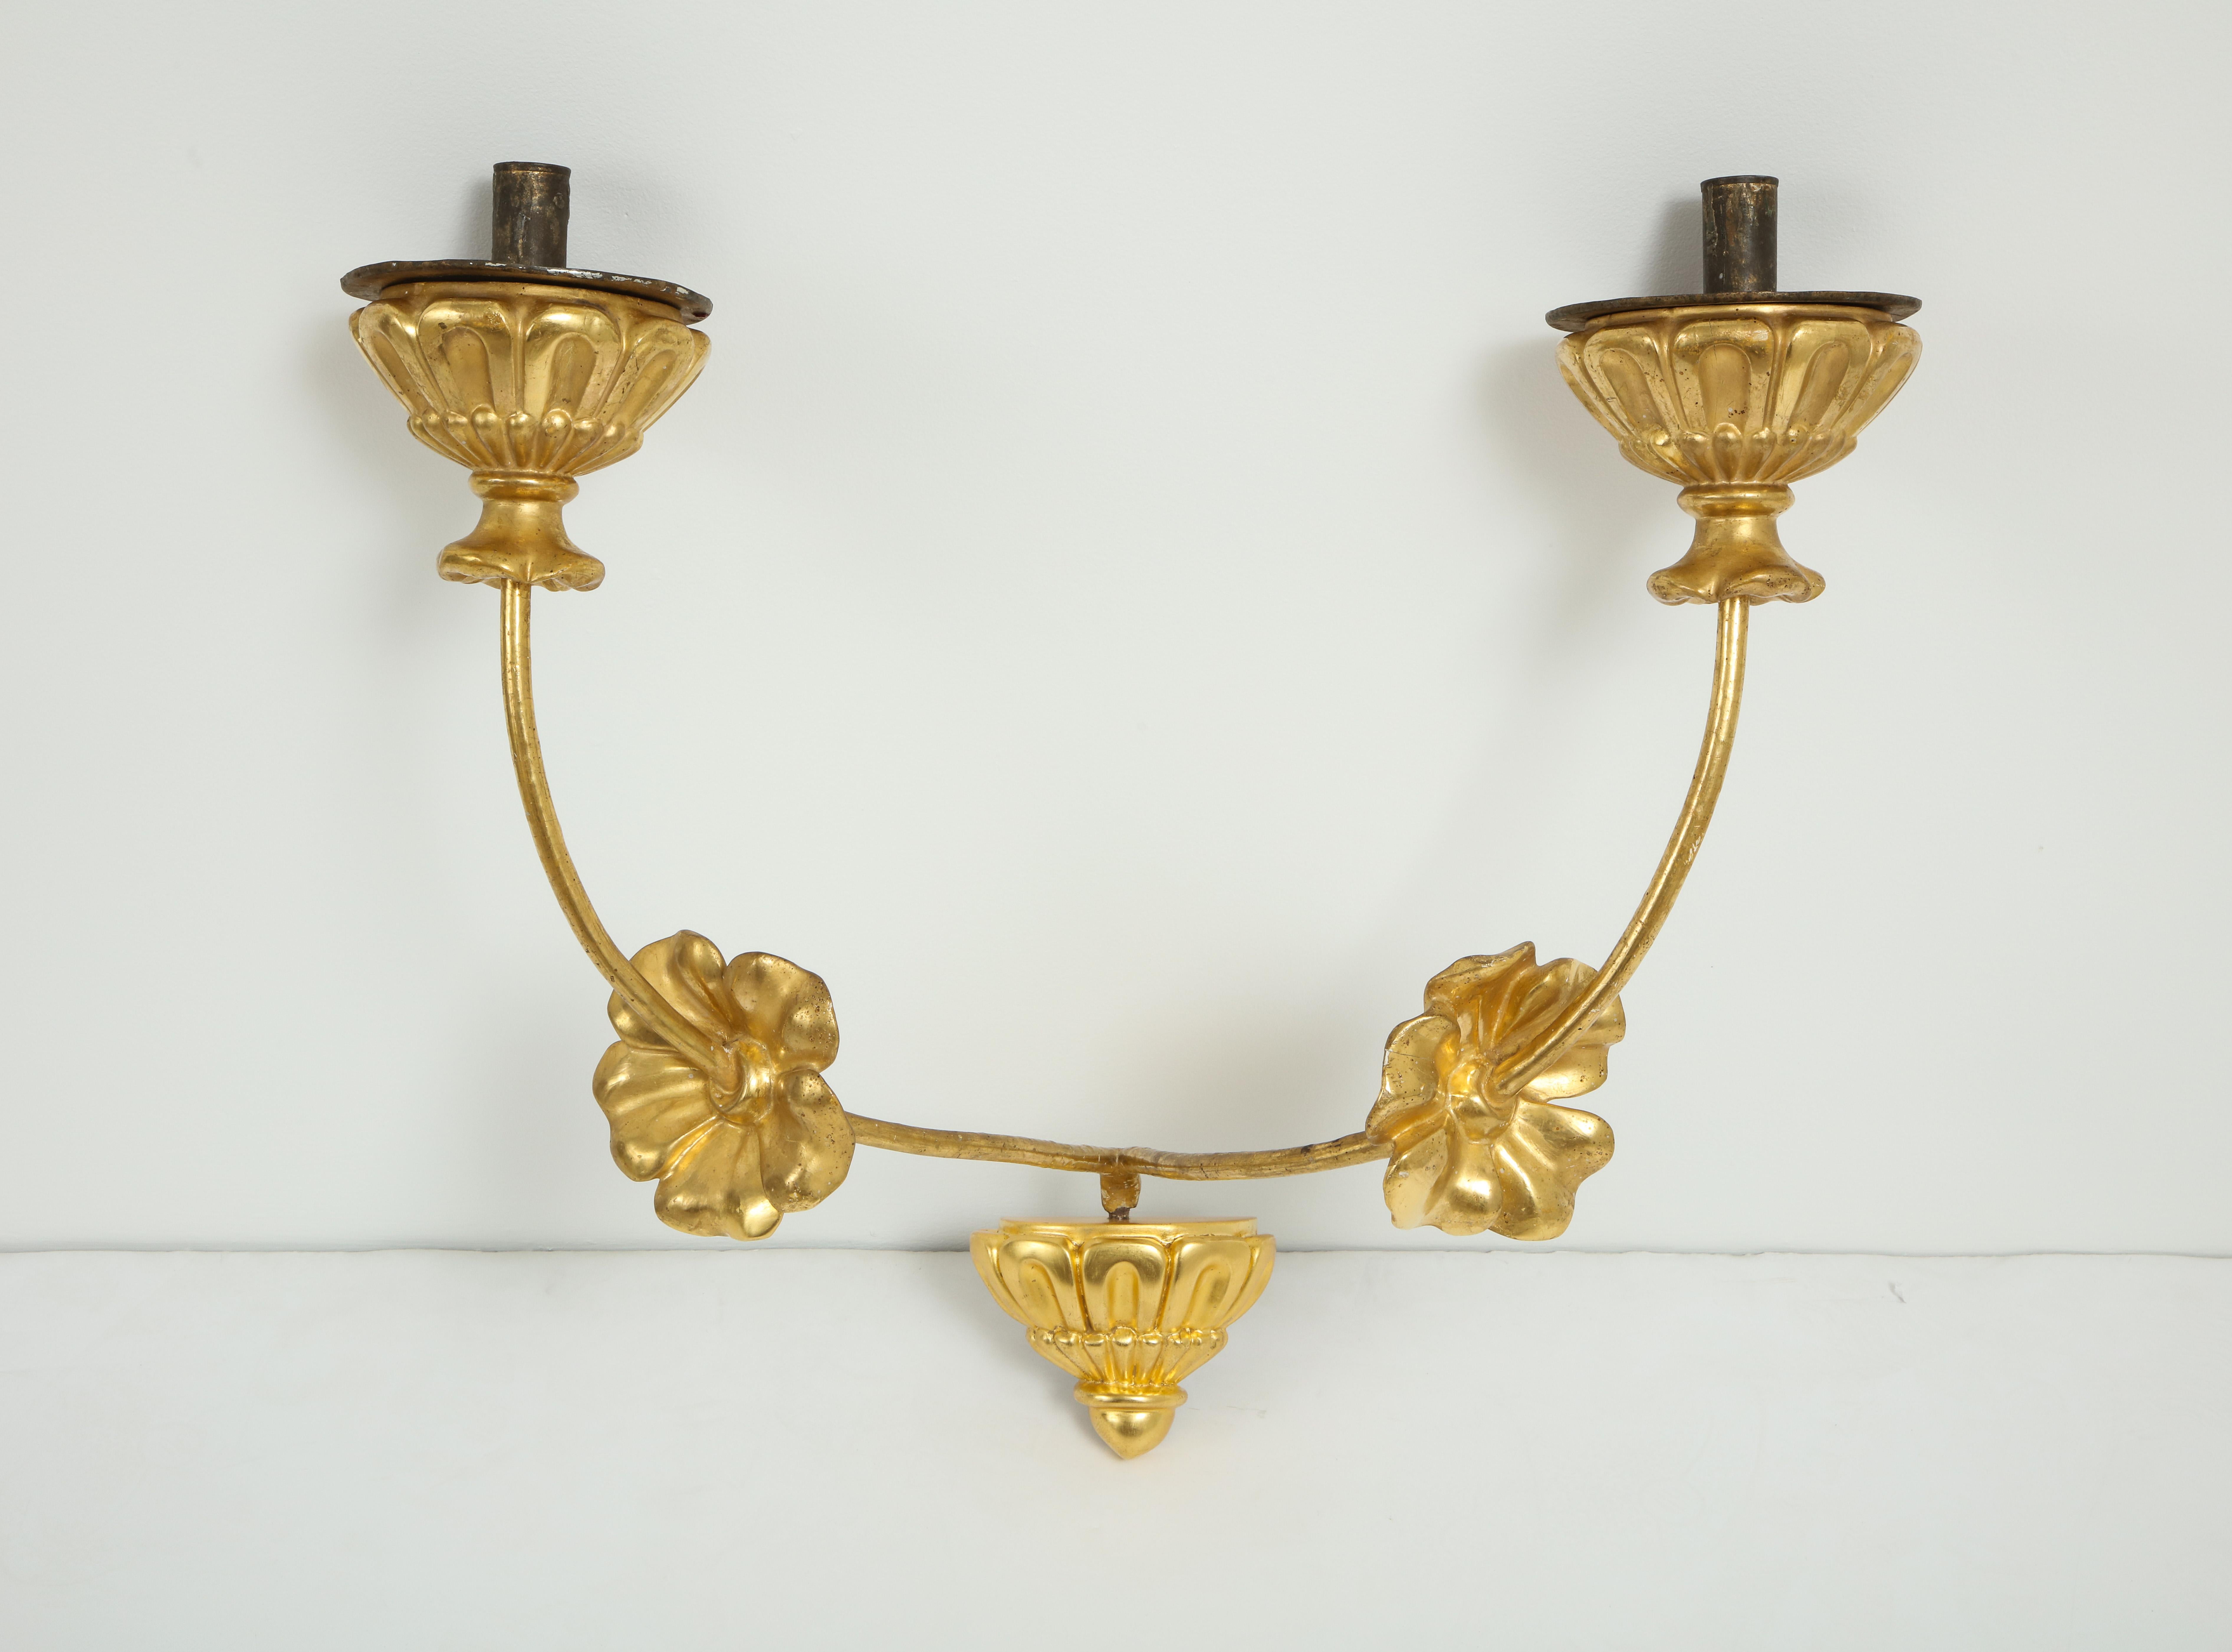 A pair of grand scale neoclassic gilded iron and carved giltwood, two-light wall sconces. The gilded bobeche with acanthus leaf carving; the elegant arms decorated with gilded carved flowers (The base brackets later). Not electrified.
Italy, circa